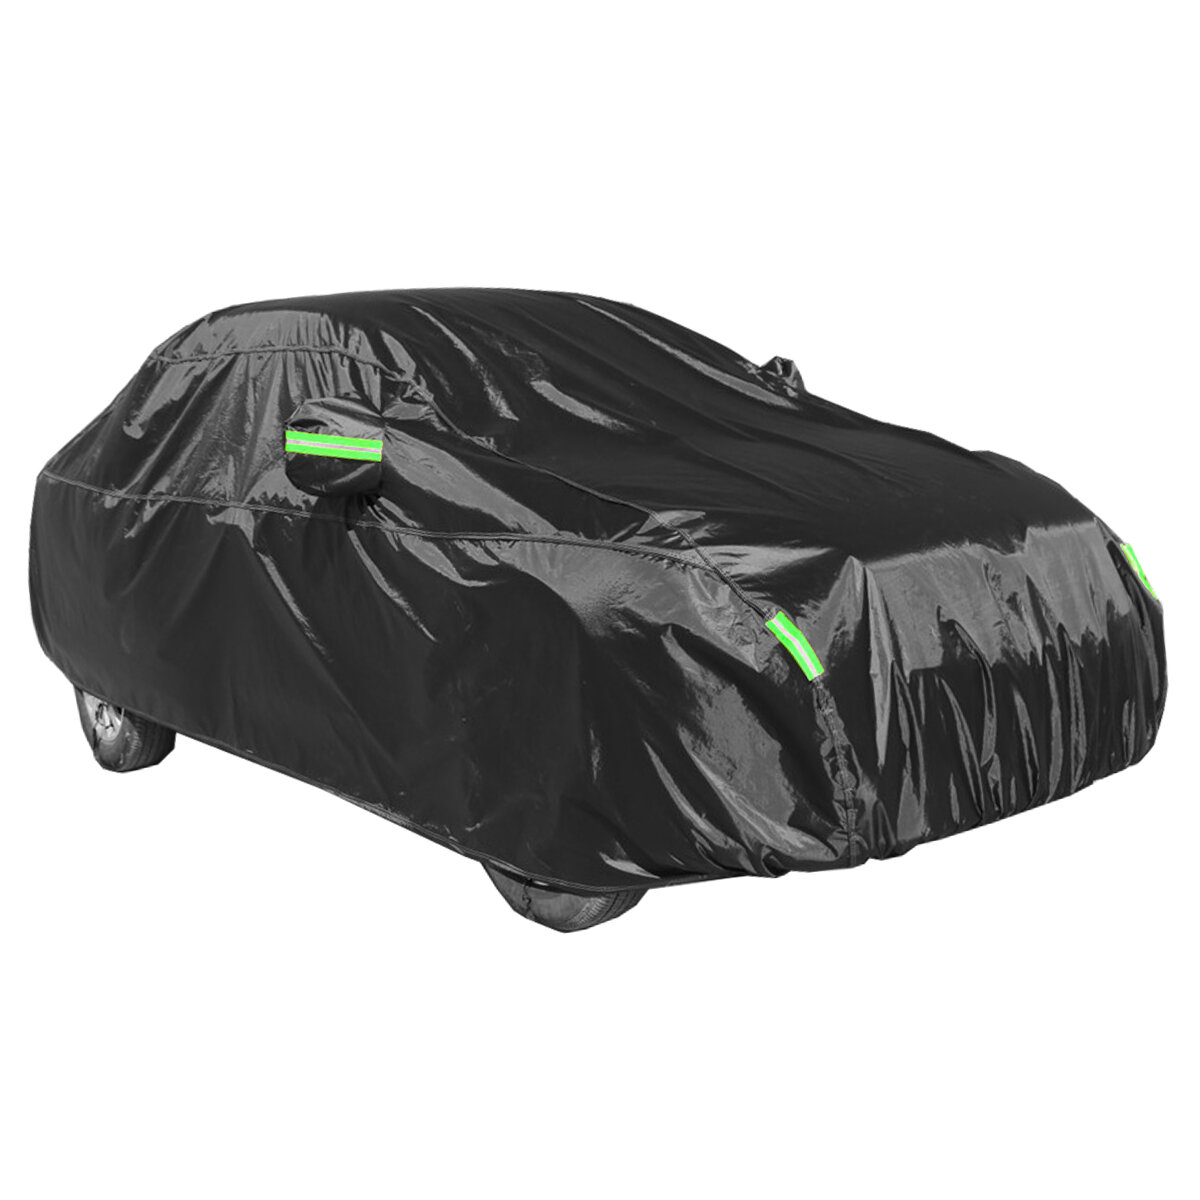 210T Silver Coated Car Cover Dustproof Sunscreen Rainproof Car Protected Full Cover